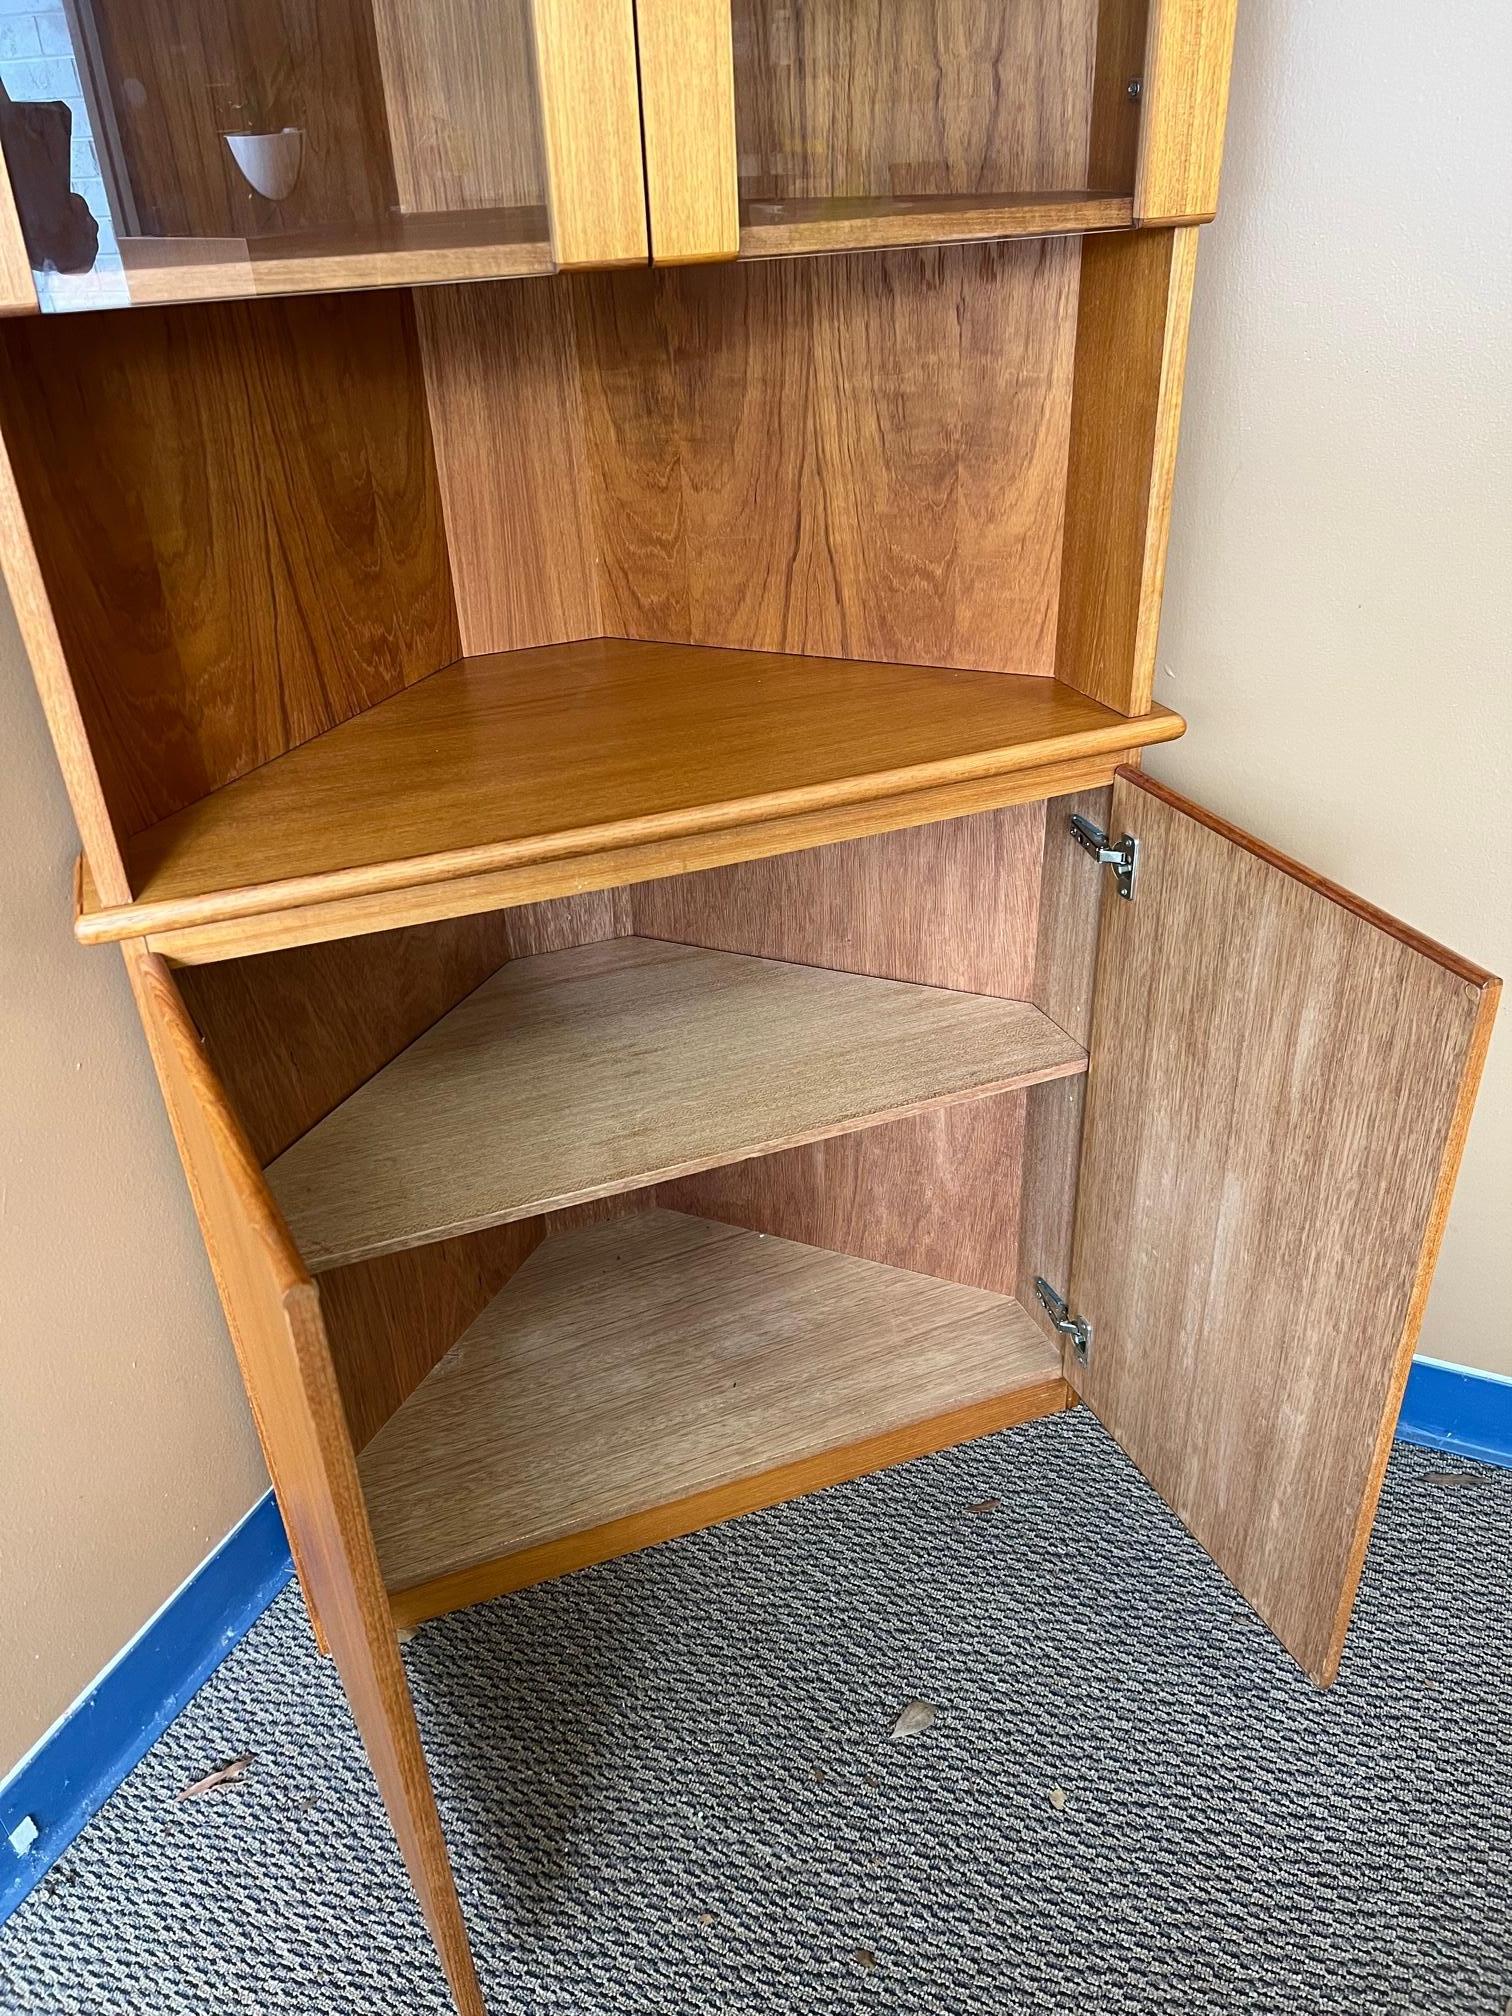 Outstanding Danish teak corner cabinet. Adjustable glass shelves at the top. Adjustable wood shelf at the bottom. Top has a light. Power cord is mounted on the top.
Excellent condition.
Dimensions: width 34